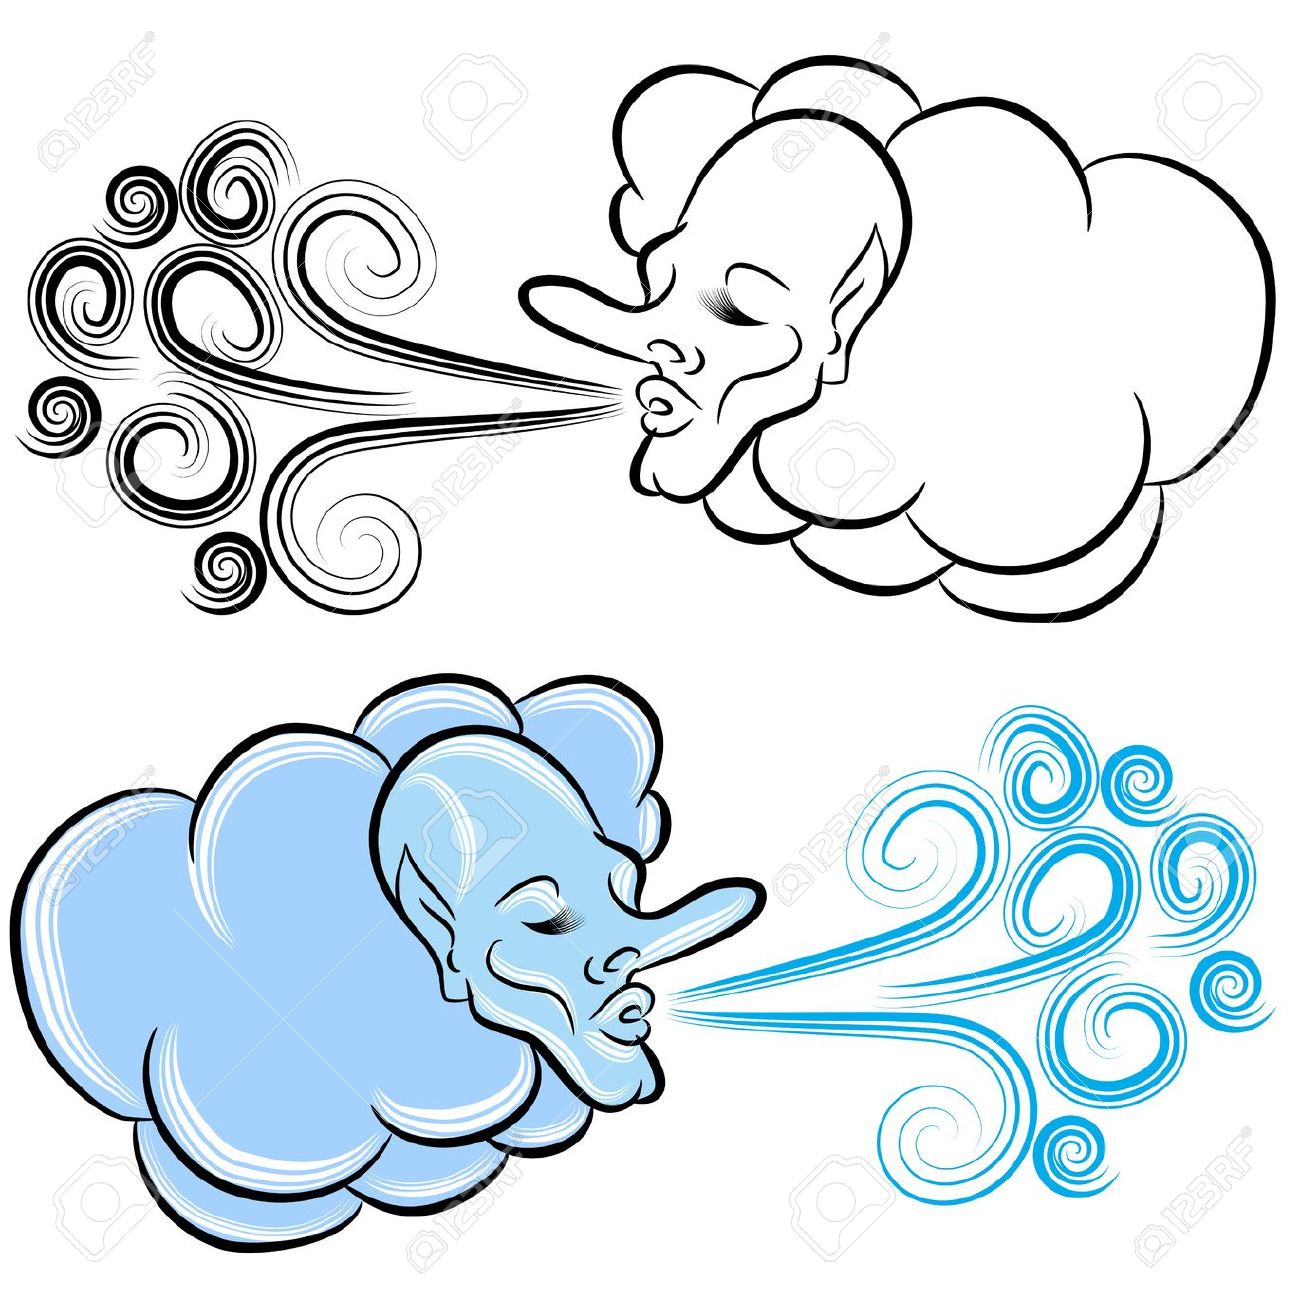 Air clipart free images